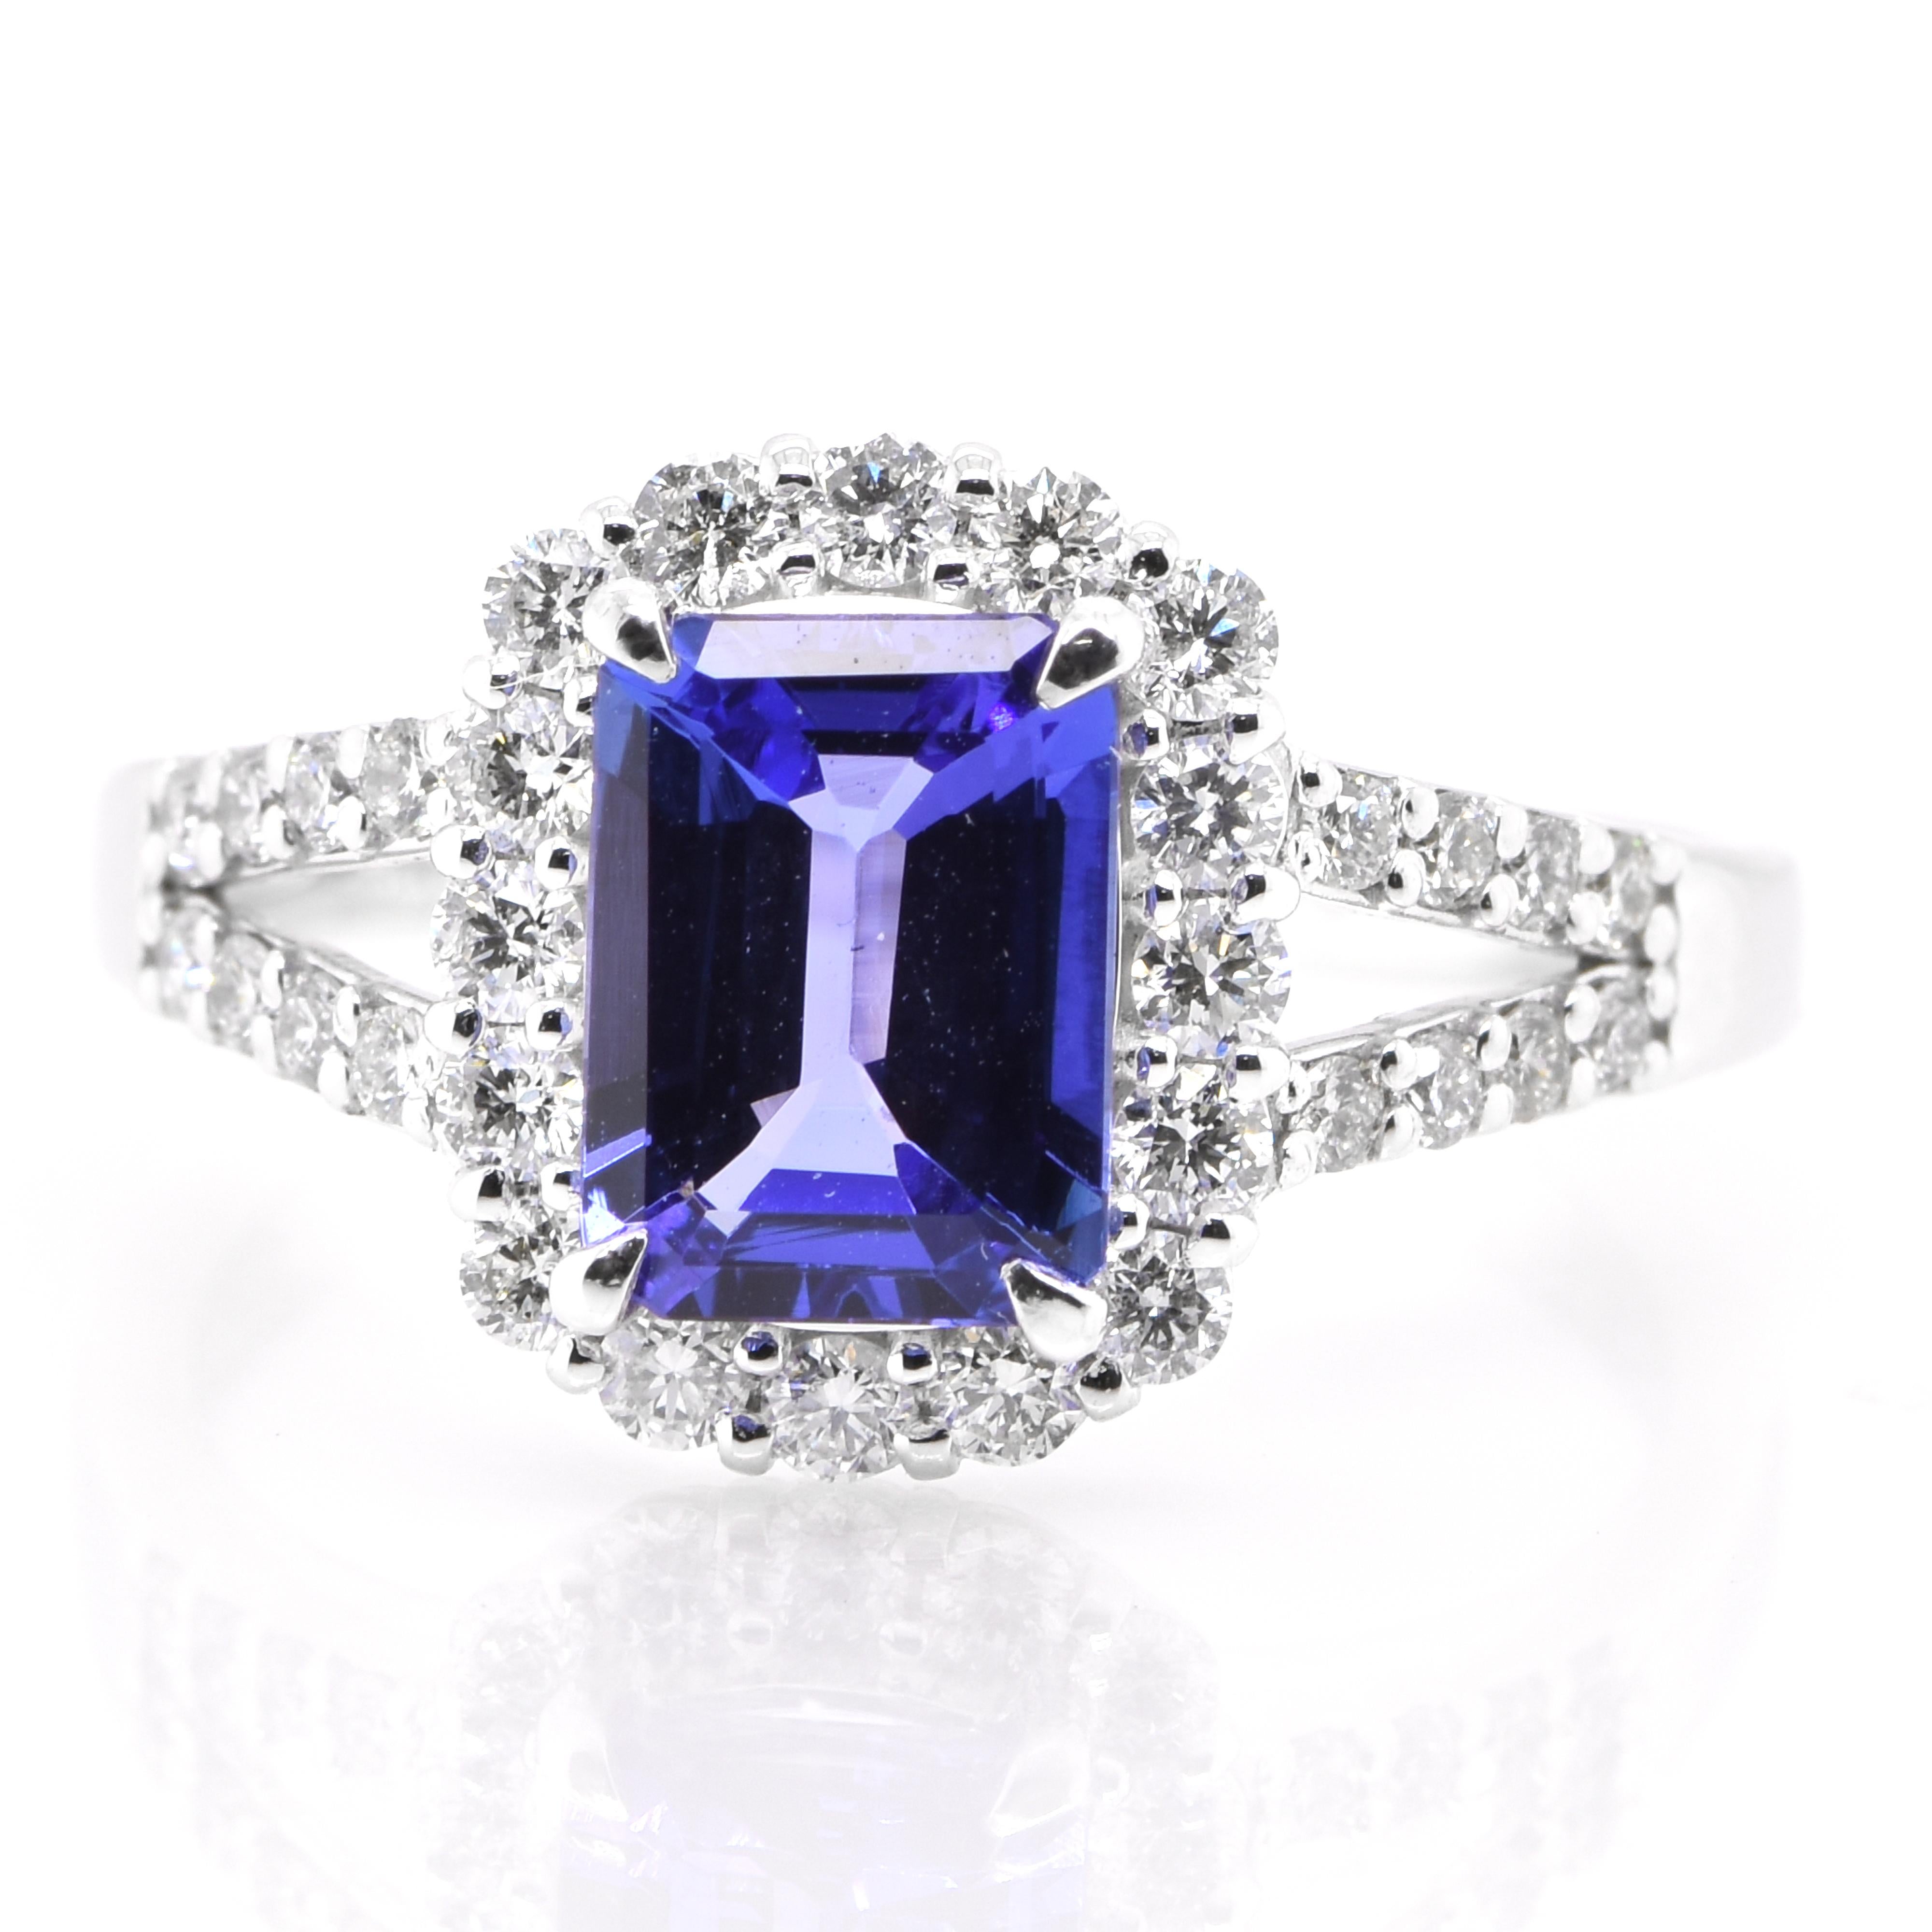 A beautiful ring featuring a 1.43 Carat Natural Tanzanite and 0.51 Carats of Diamond Accents set in Platinum. Tanzanite's name was given by Tiffany and Co after its only known source: Tanzania. Tanzanite displays beautiful pleochroic colors meaning